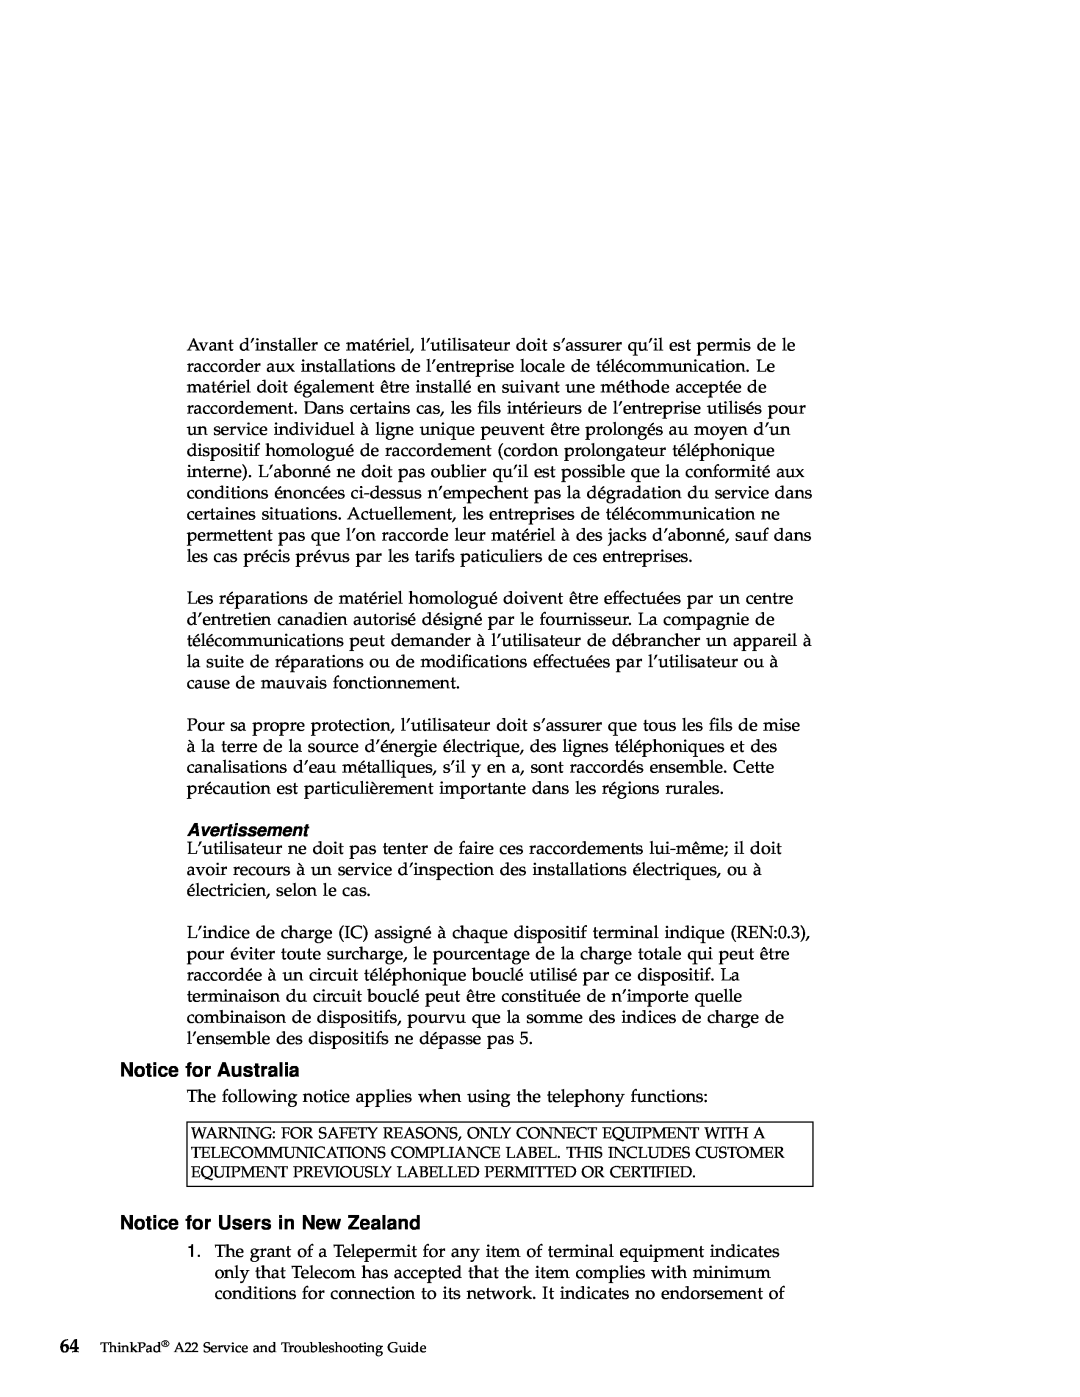 IBM A22 manual Notice for Australia, Notice for Users in New Zealand, Avertissement 